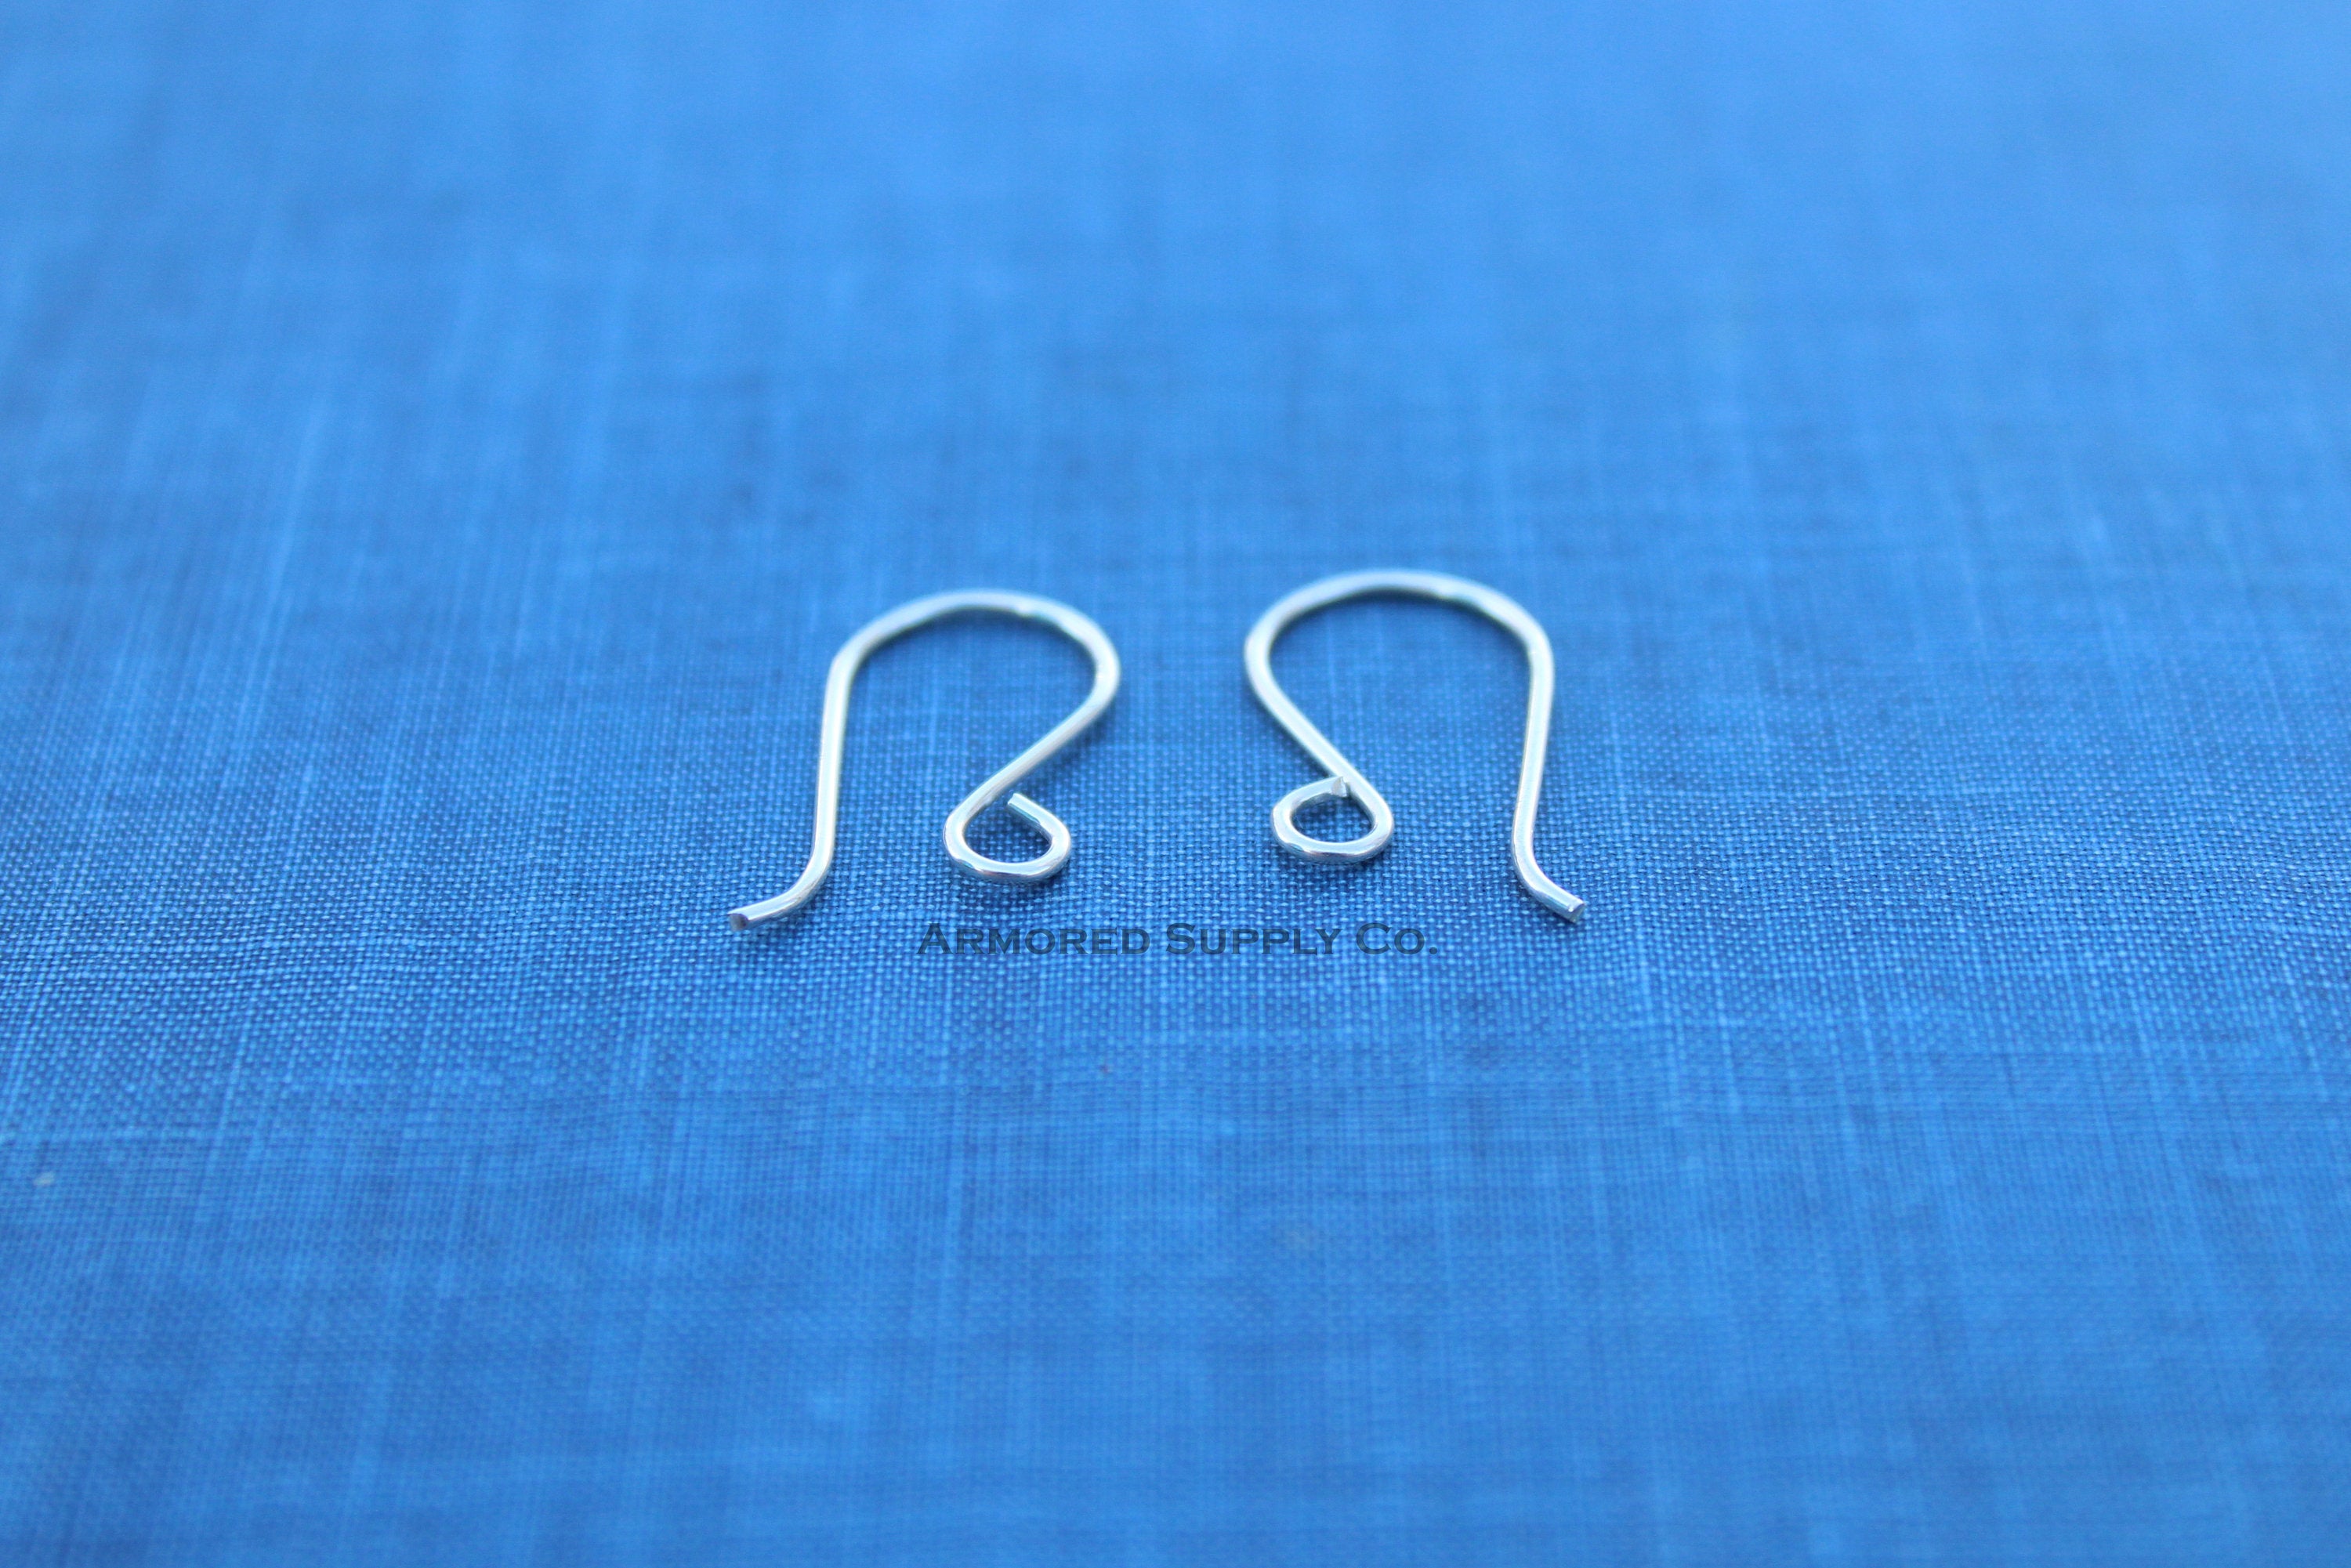 French Ear Wires Side Facing Loop, Silver or Gold Earrings, Earring Disc, Wholesale Blanks, Disk Earrings, DIY Jewelry, Jewelry Supplies